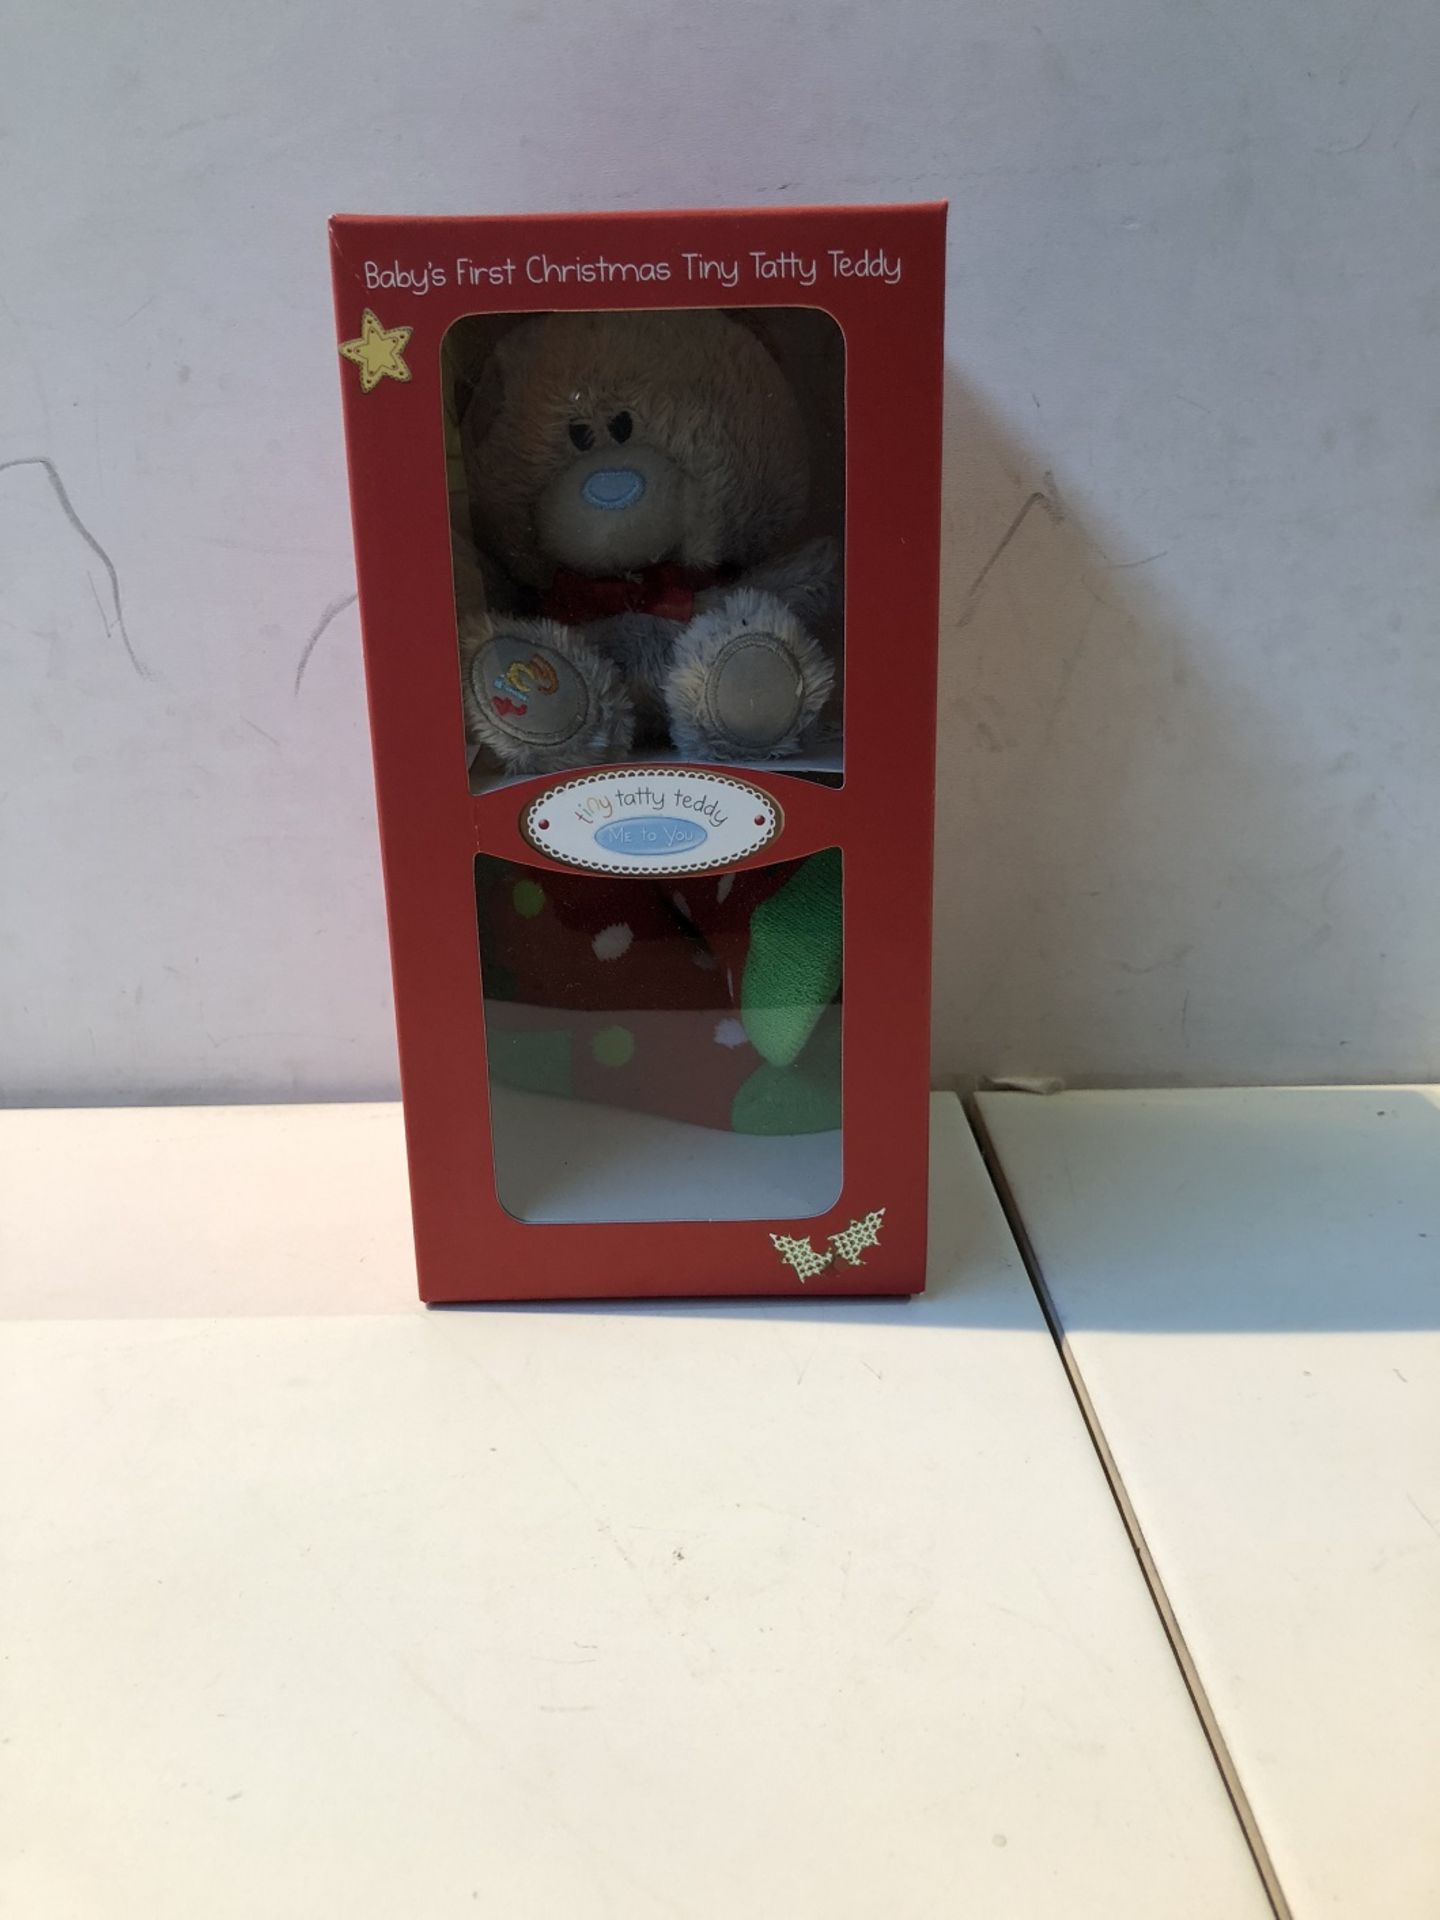 1 / BRAND NEW BOXED ME TO YOU BABIES FIRST CHRISTMAS TINY TATTY TEDDY (VIEWING HIGHLY RECOMMENED)